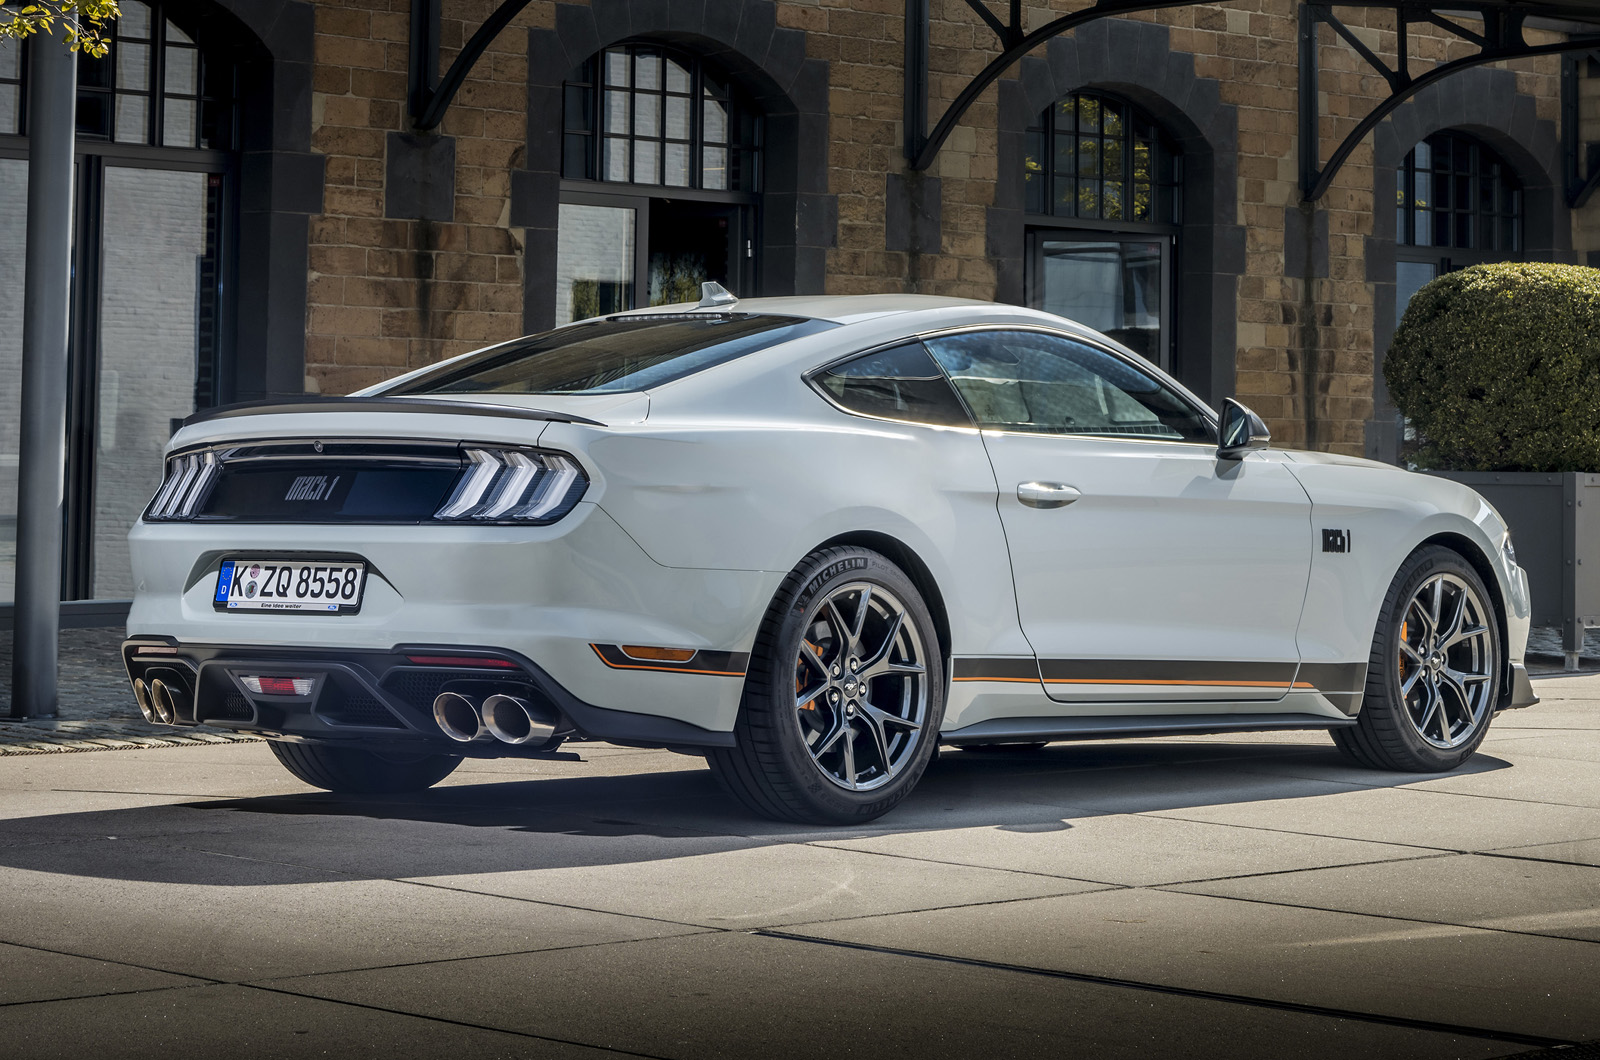 New Ford Mustang Mach 1 Packs 454Bhp, Costs £55,185 | Autocar